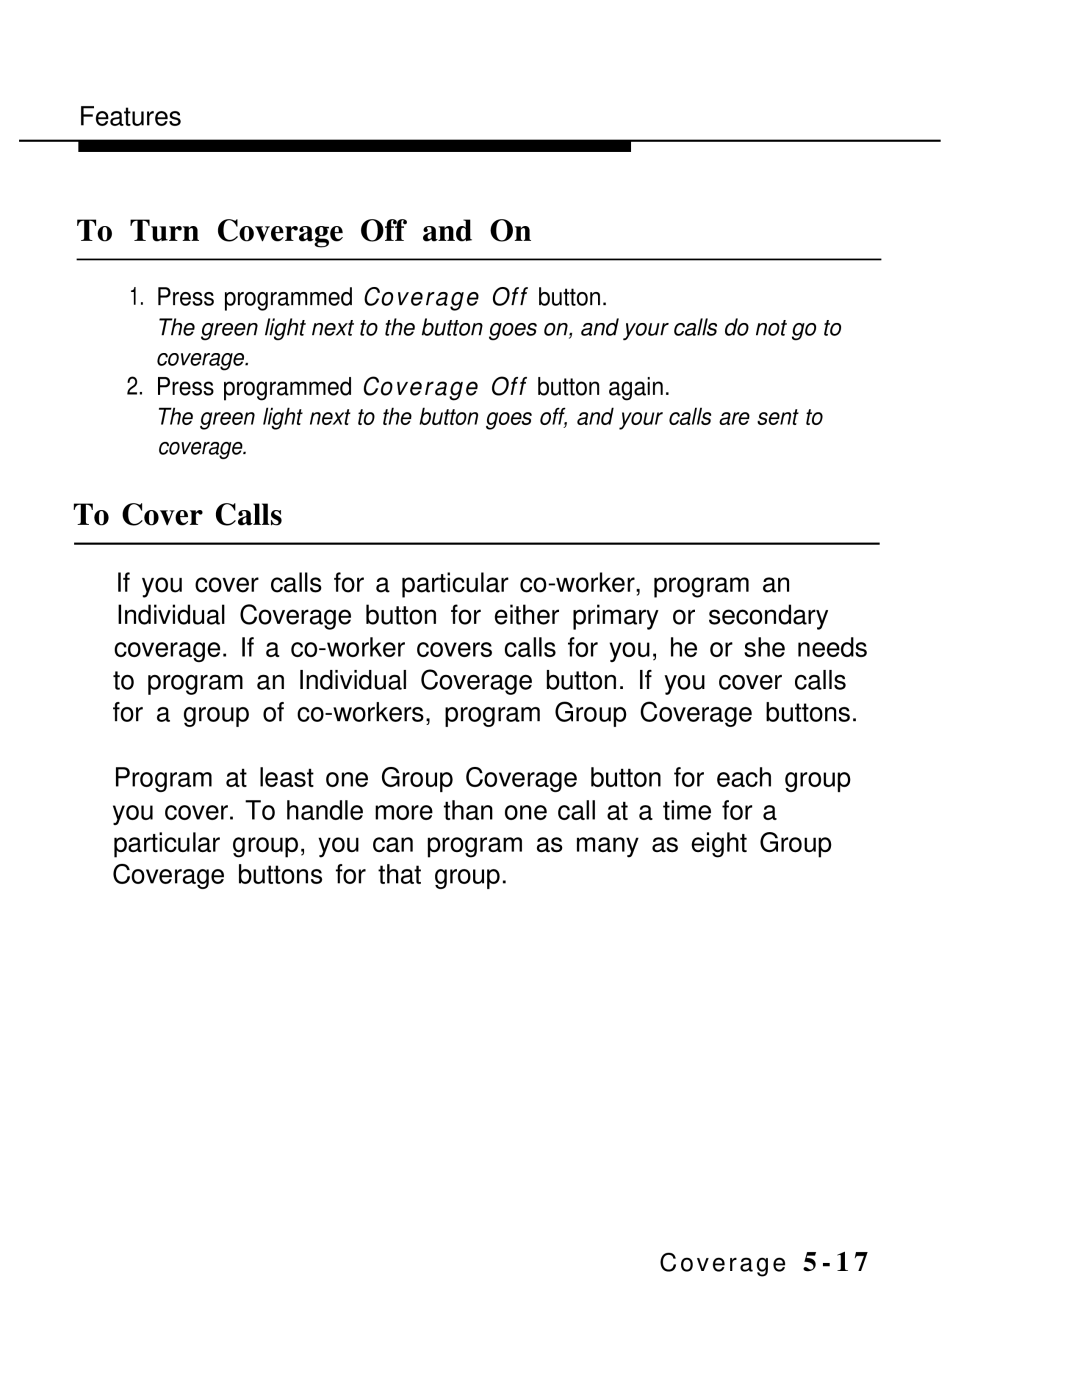 AT&T MLX-10 manual To Turn Coverage Off and On, To Cover Calls 